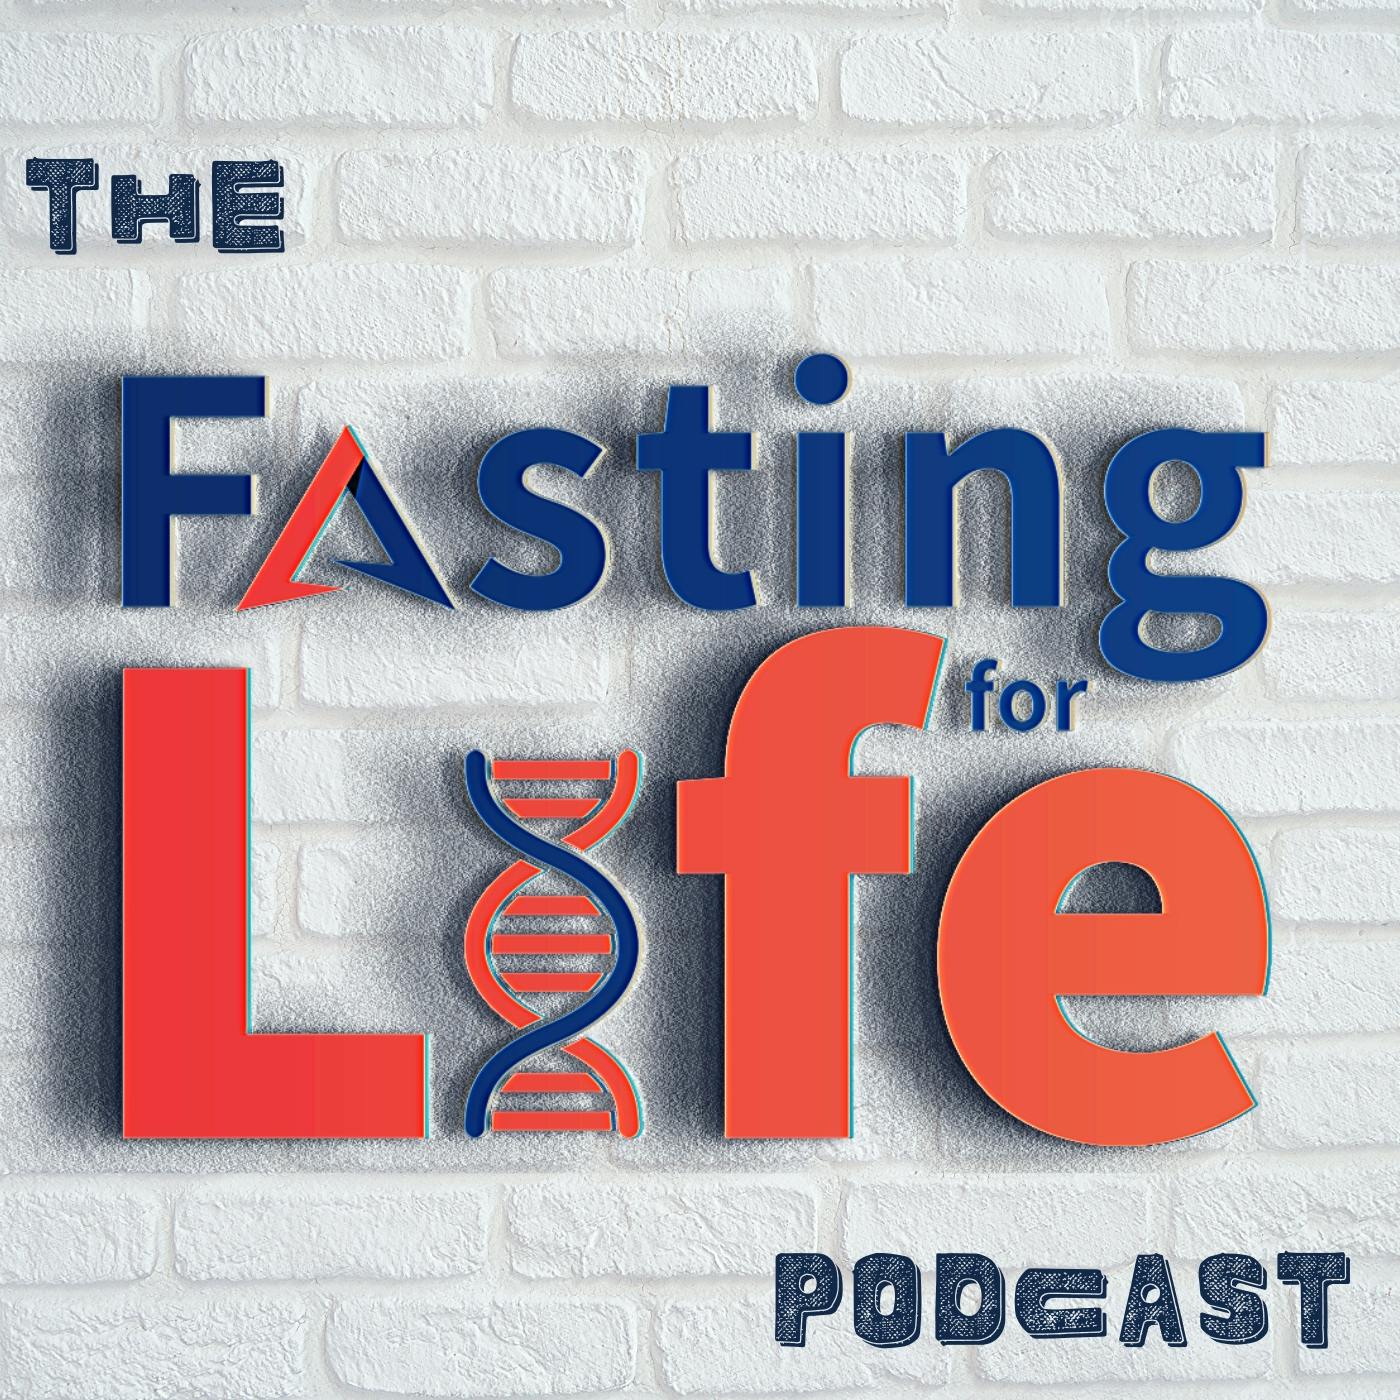 Ep. 44 - Do intermittent fasting, OMAD, & ADF slow metabolism? Correctly using alternate day fasting | Unsupportive doctors, Lowering pain meds, Reduced inflammation and swelling, Lower blood pressure